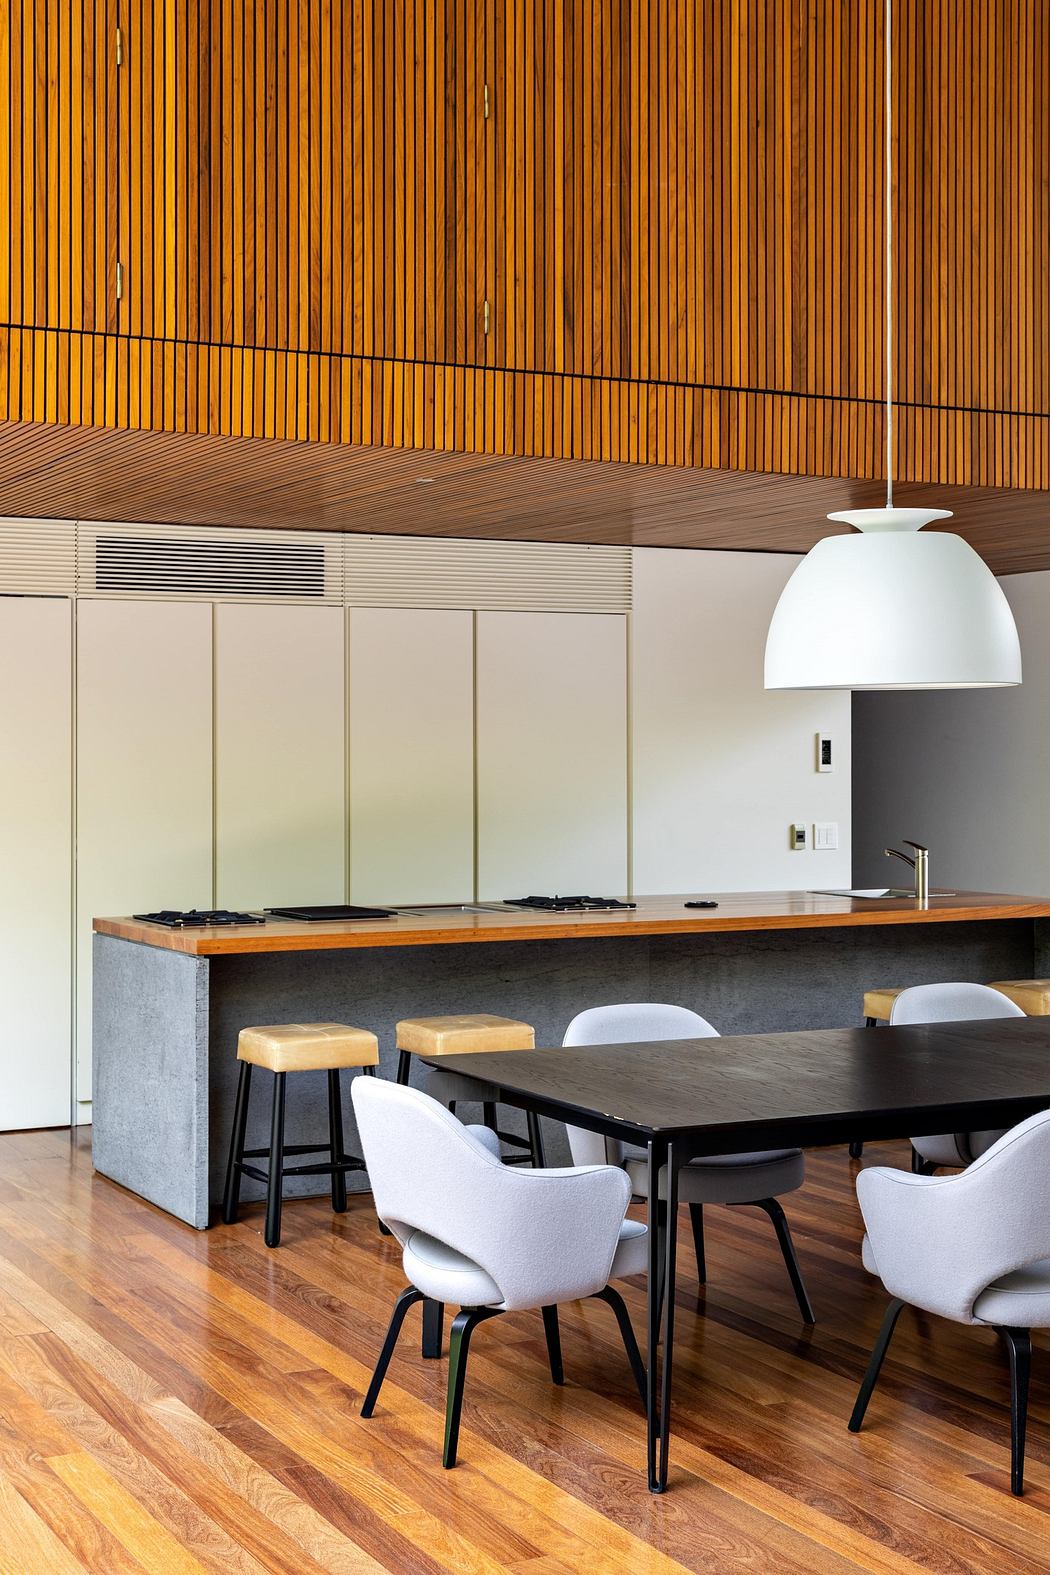 Contemporary kitchen with wooden slatted ceiling and minimalist furniture.